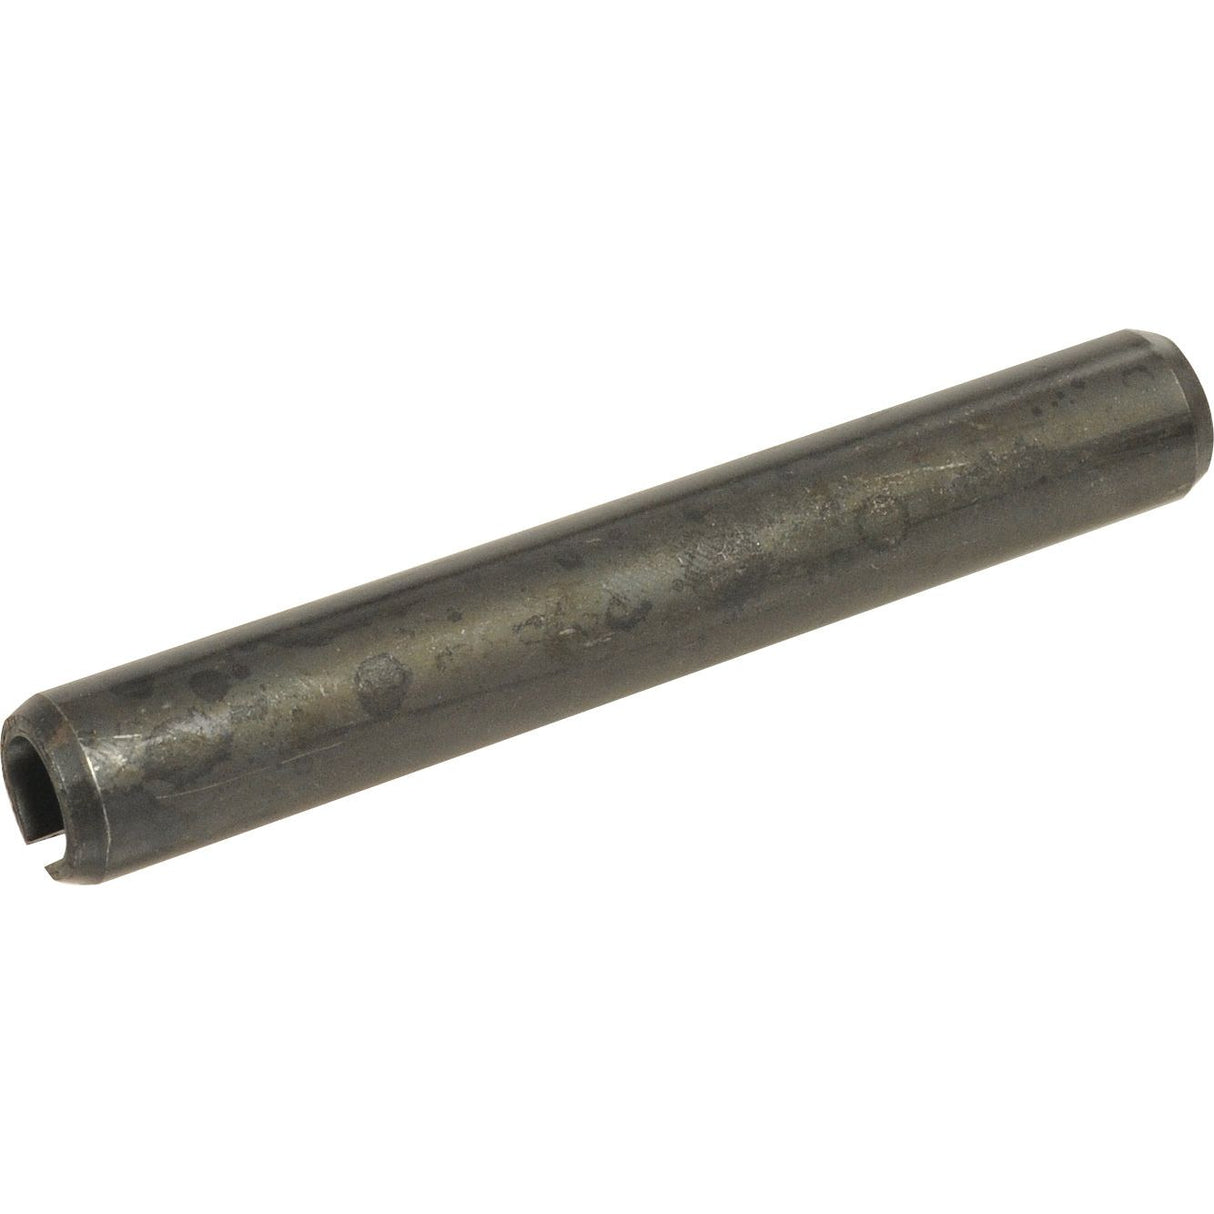 Imperial Roll Pin, Pin⌀5/16'' x 2 1/2''
 - S.1142 - Farming Parts